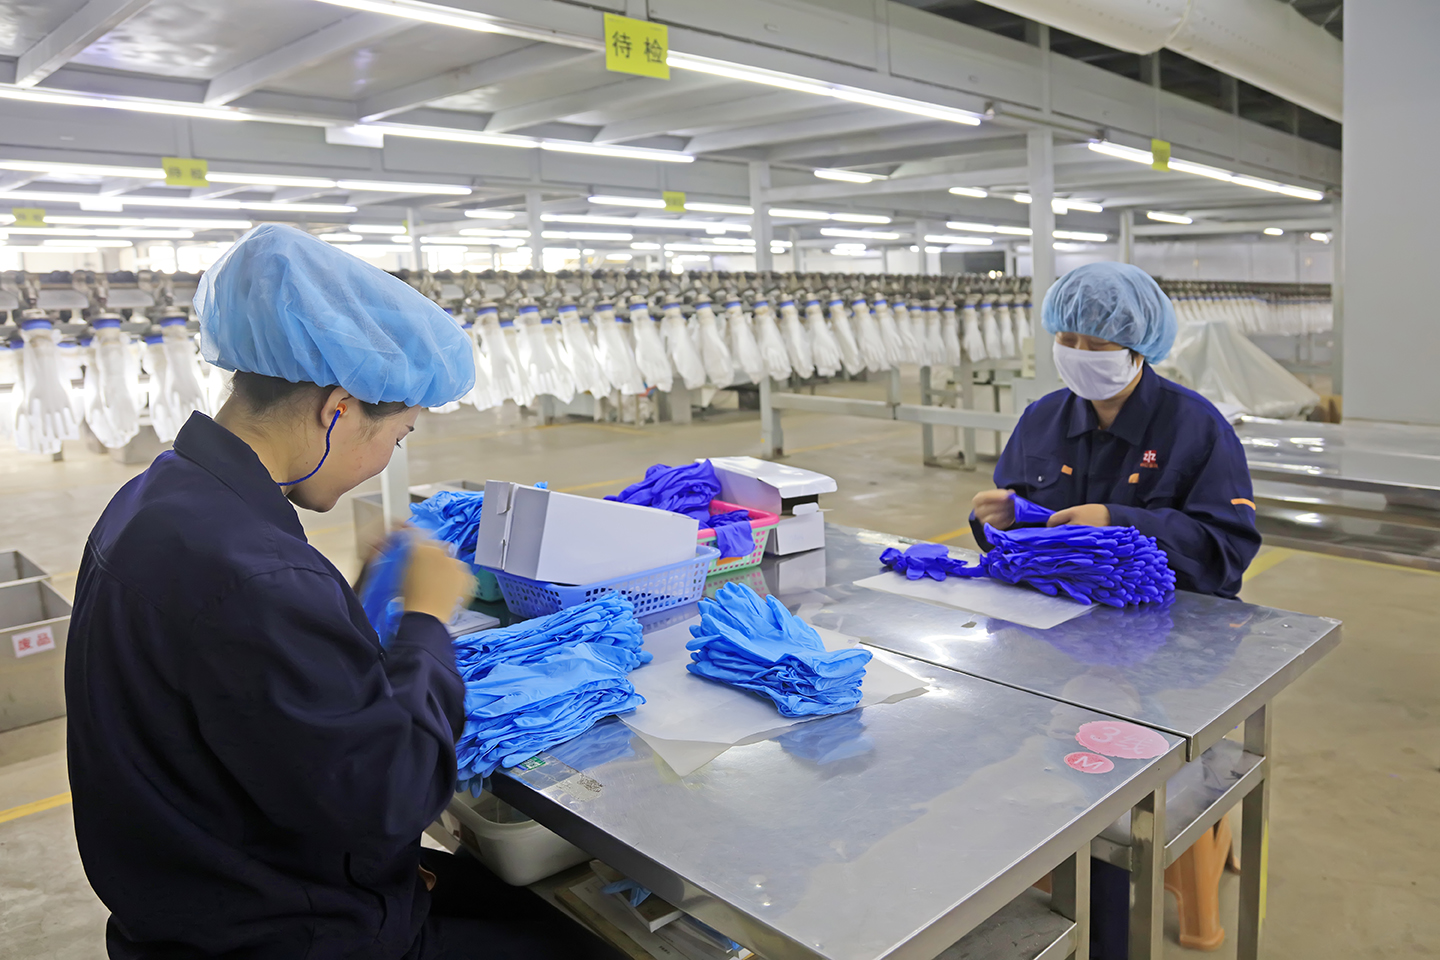 Workers assemble boxes of disposable gloves at a factory in China.